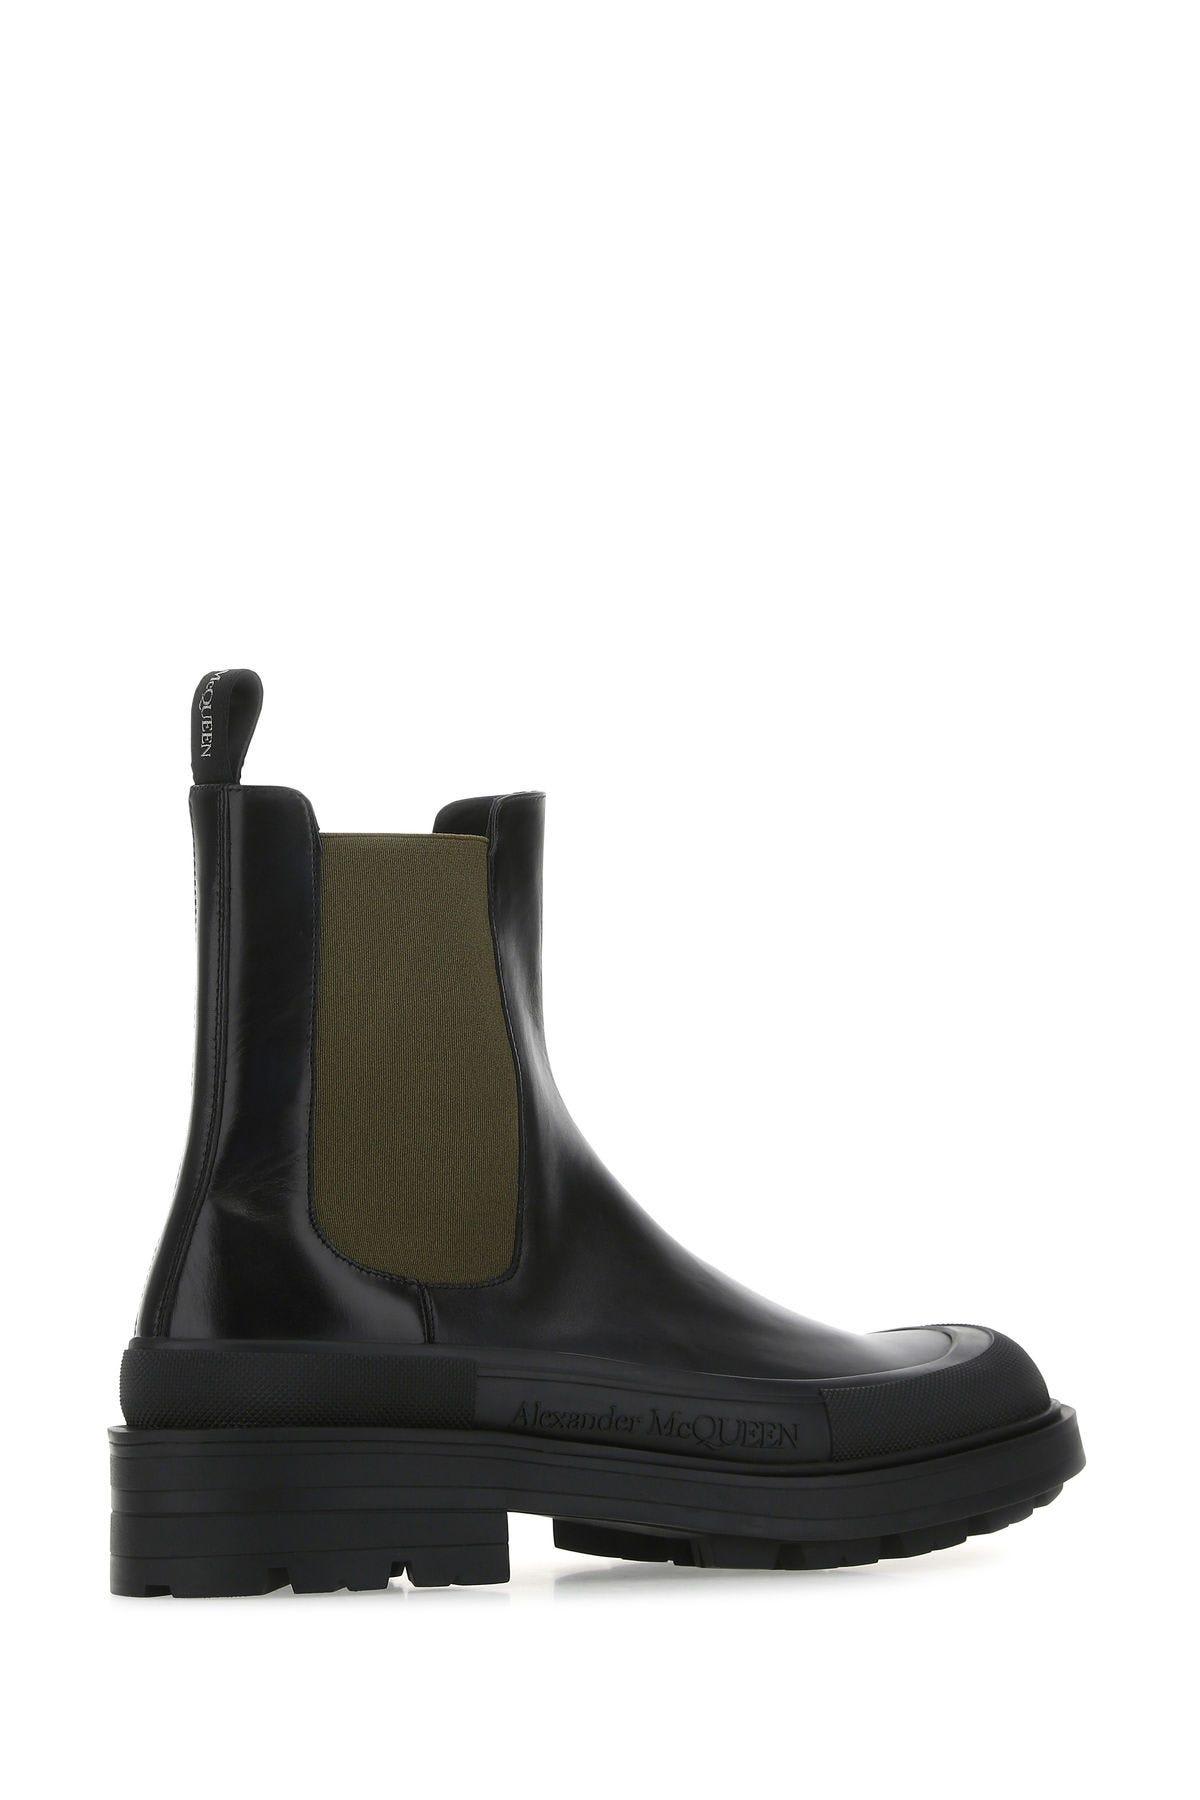 Shop Alexander Mcqueen Black Leather Boxcar Ankle Boots